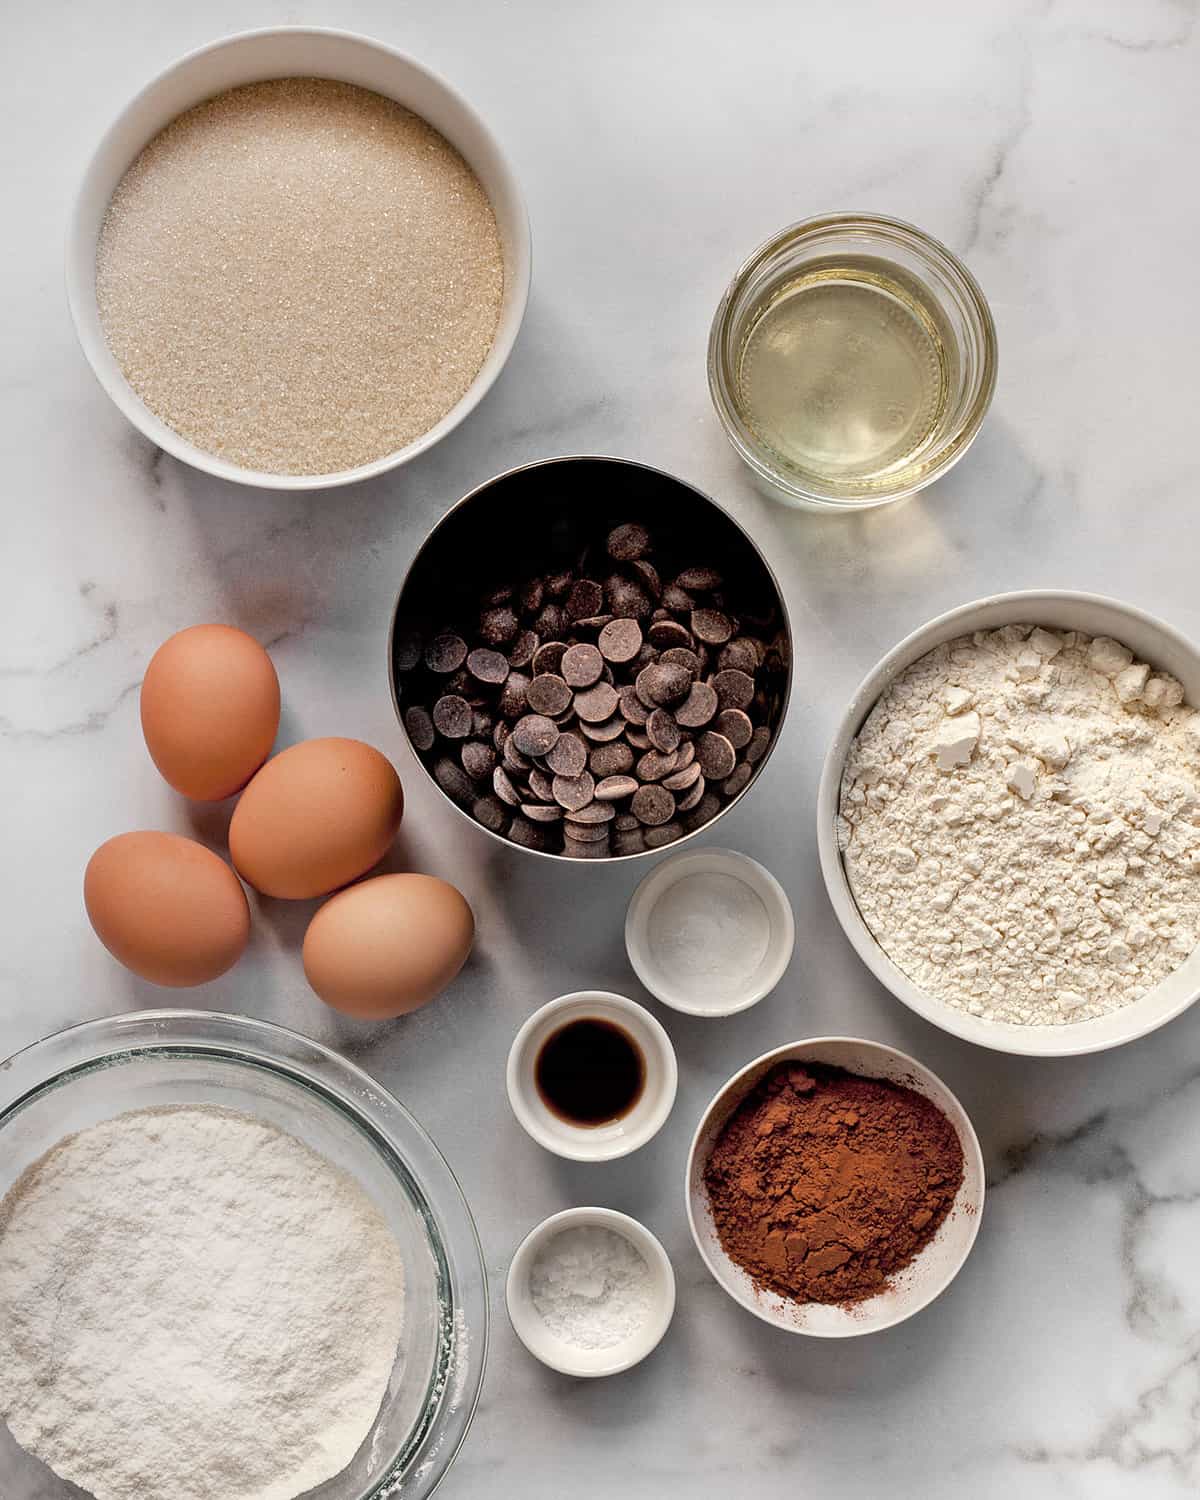 Ingredients including chocolate, cocoa powder, sugar, flour, eggs and salt.